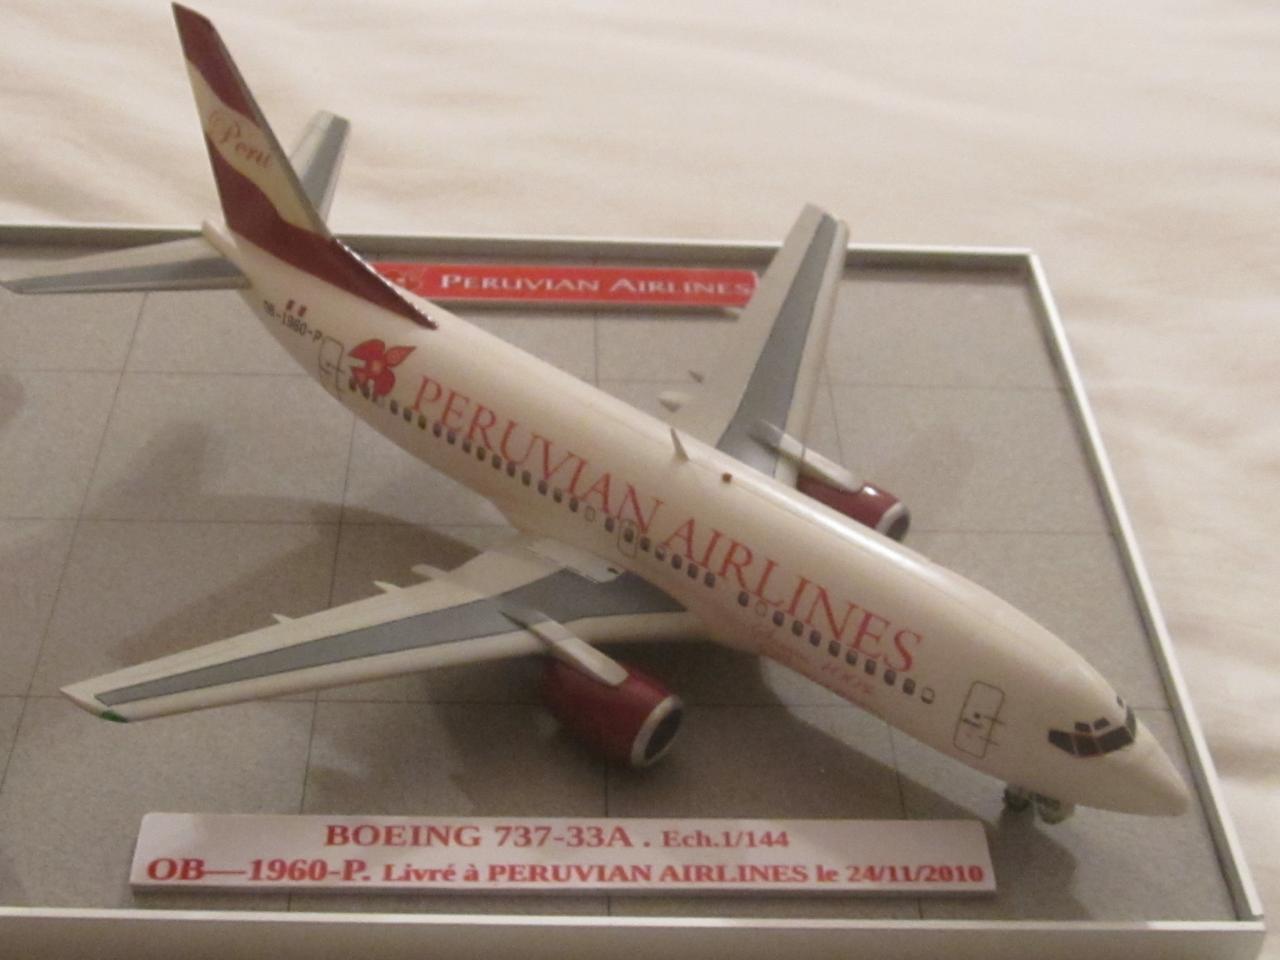 BOEING 737-33A PERUVIAN AIRLINES.